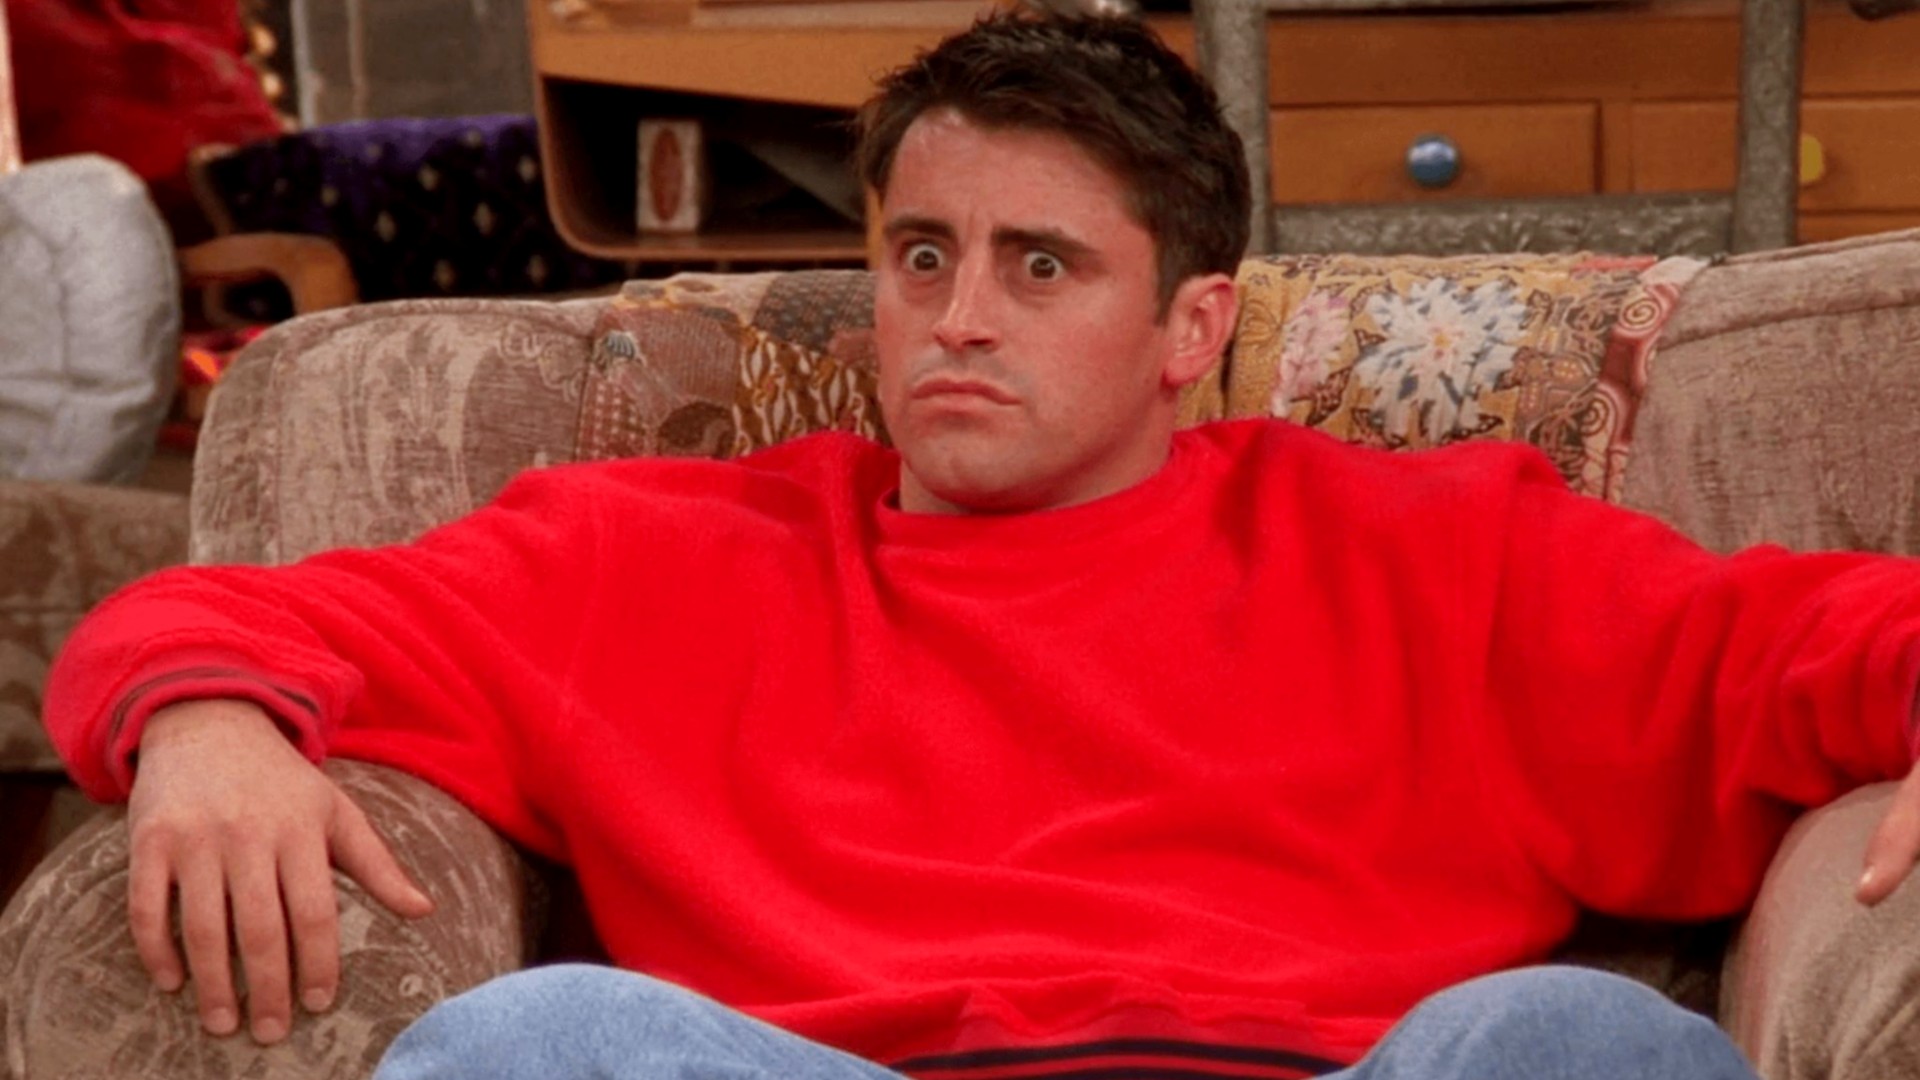 It's Official: Friends Fans Agree That This Guest Star's Arc Is the Worst - Ever